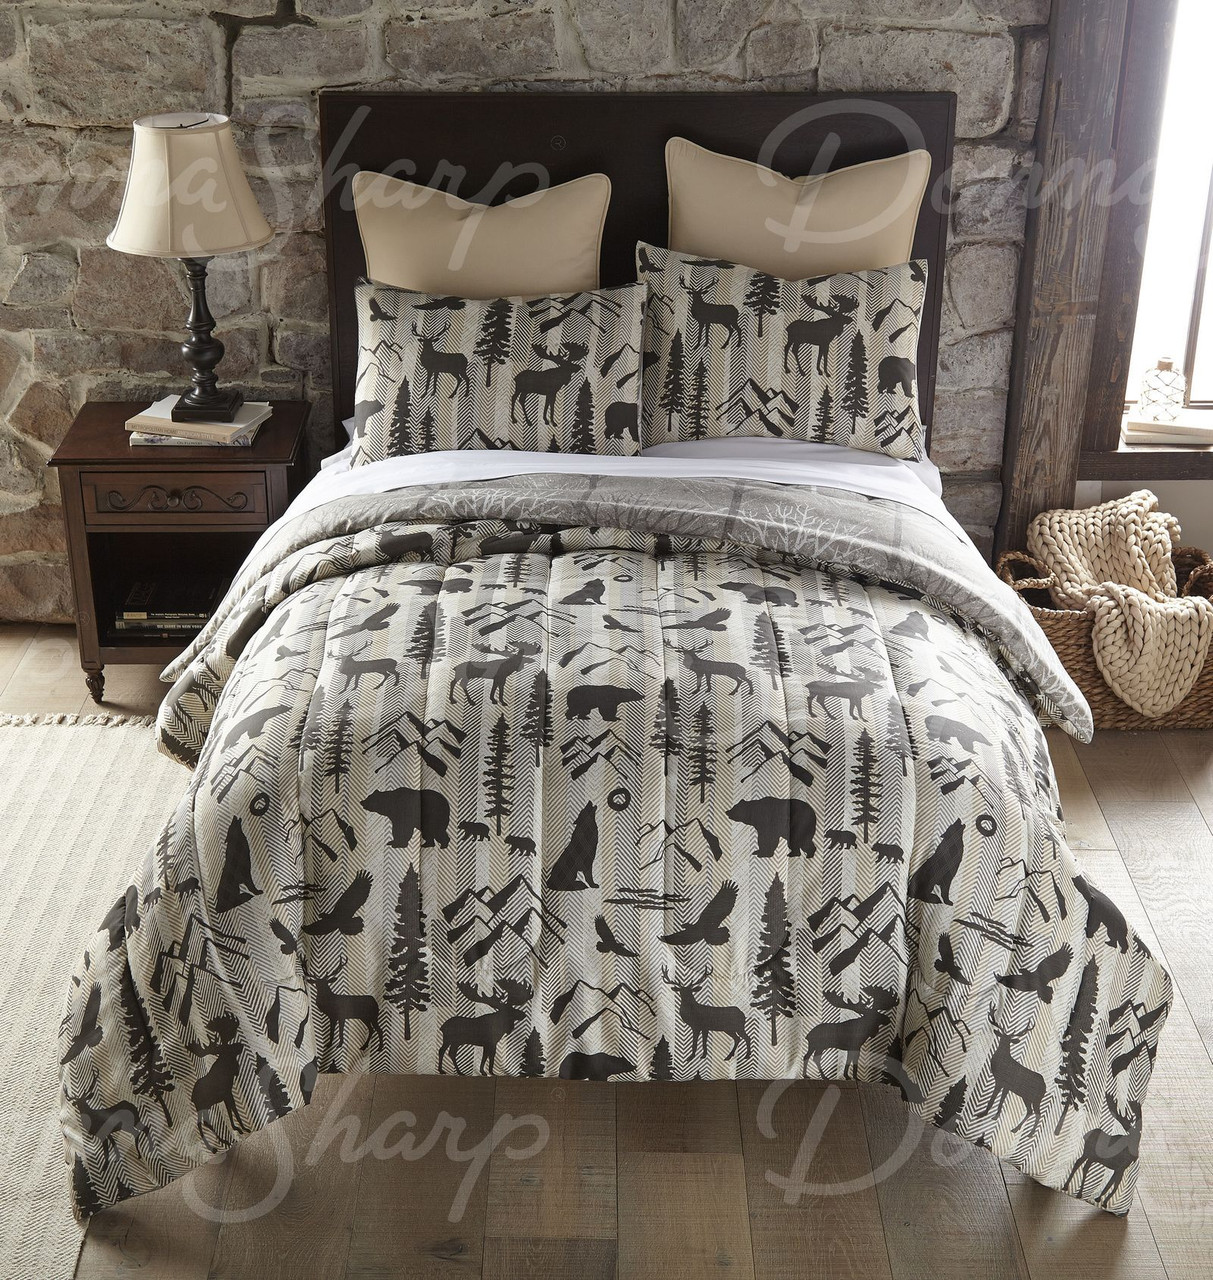 https://cdn11.bigcommerce.com/s-ihyqv7/images/stencil/1280x1280/products/3186/3658/yls-c-y2007_forest_weave_comforter_overhead_1_1__76765.1666895078.jpg?c=2